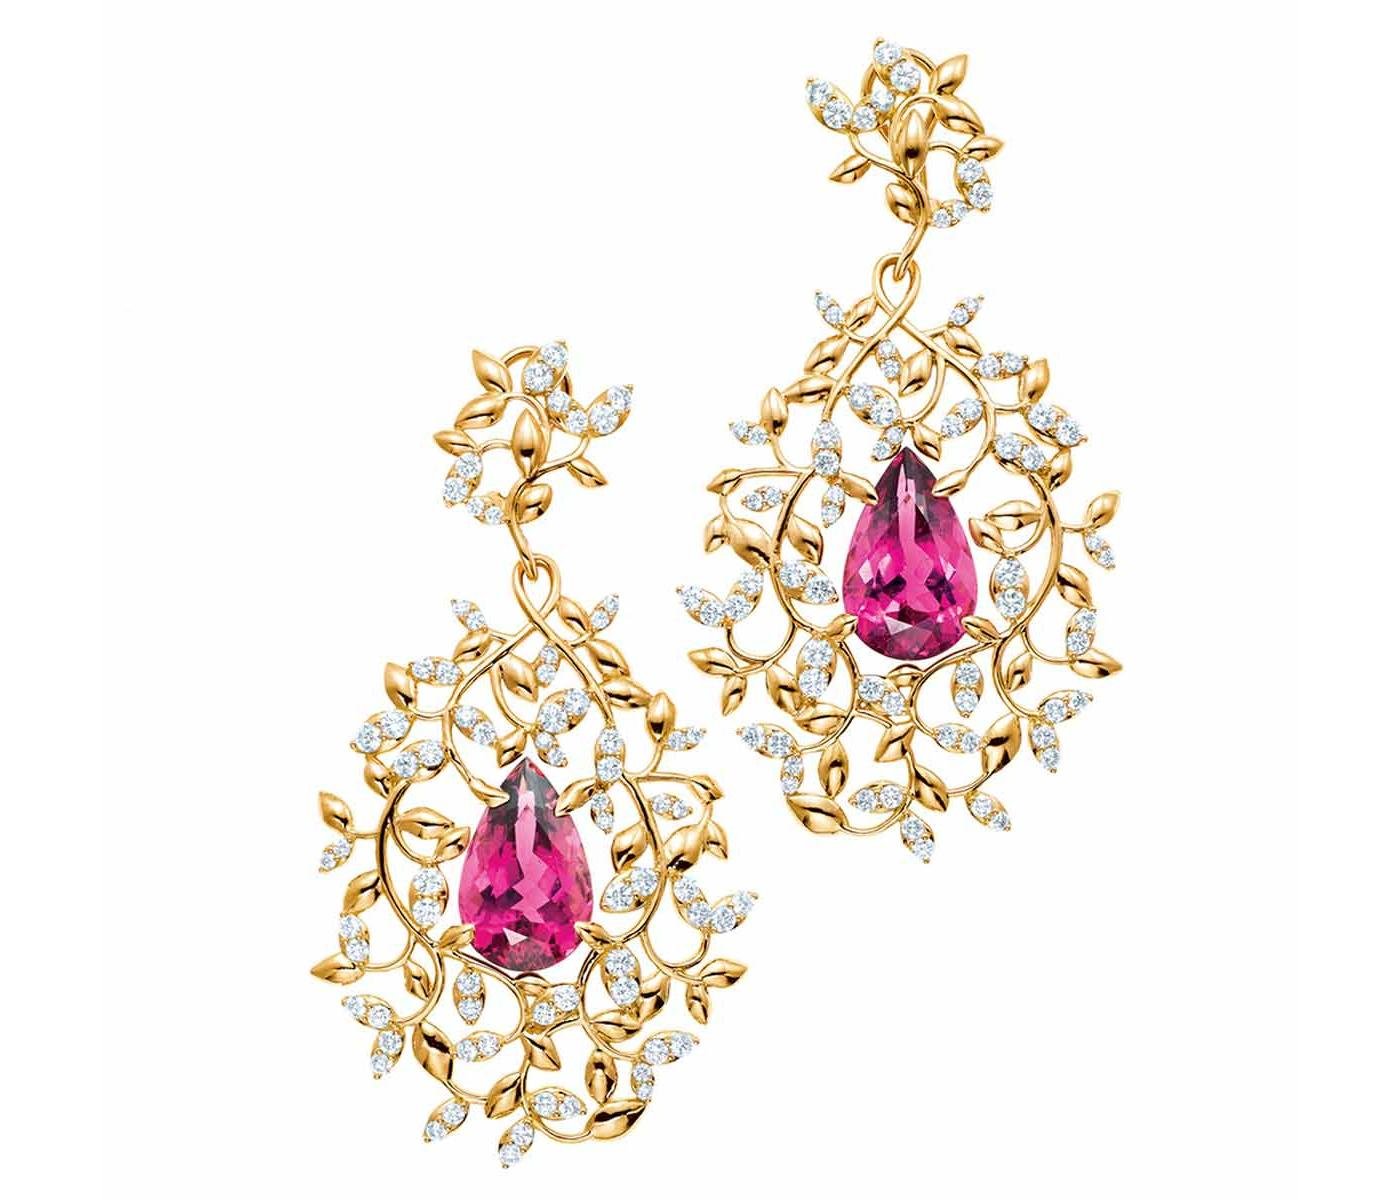 Earrings by Paloma Picasso for Tiffany & Co